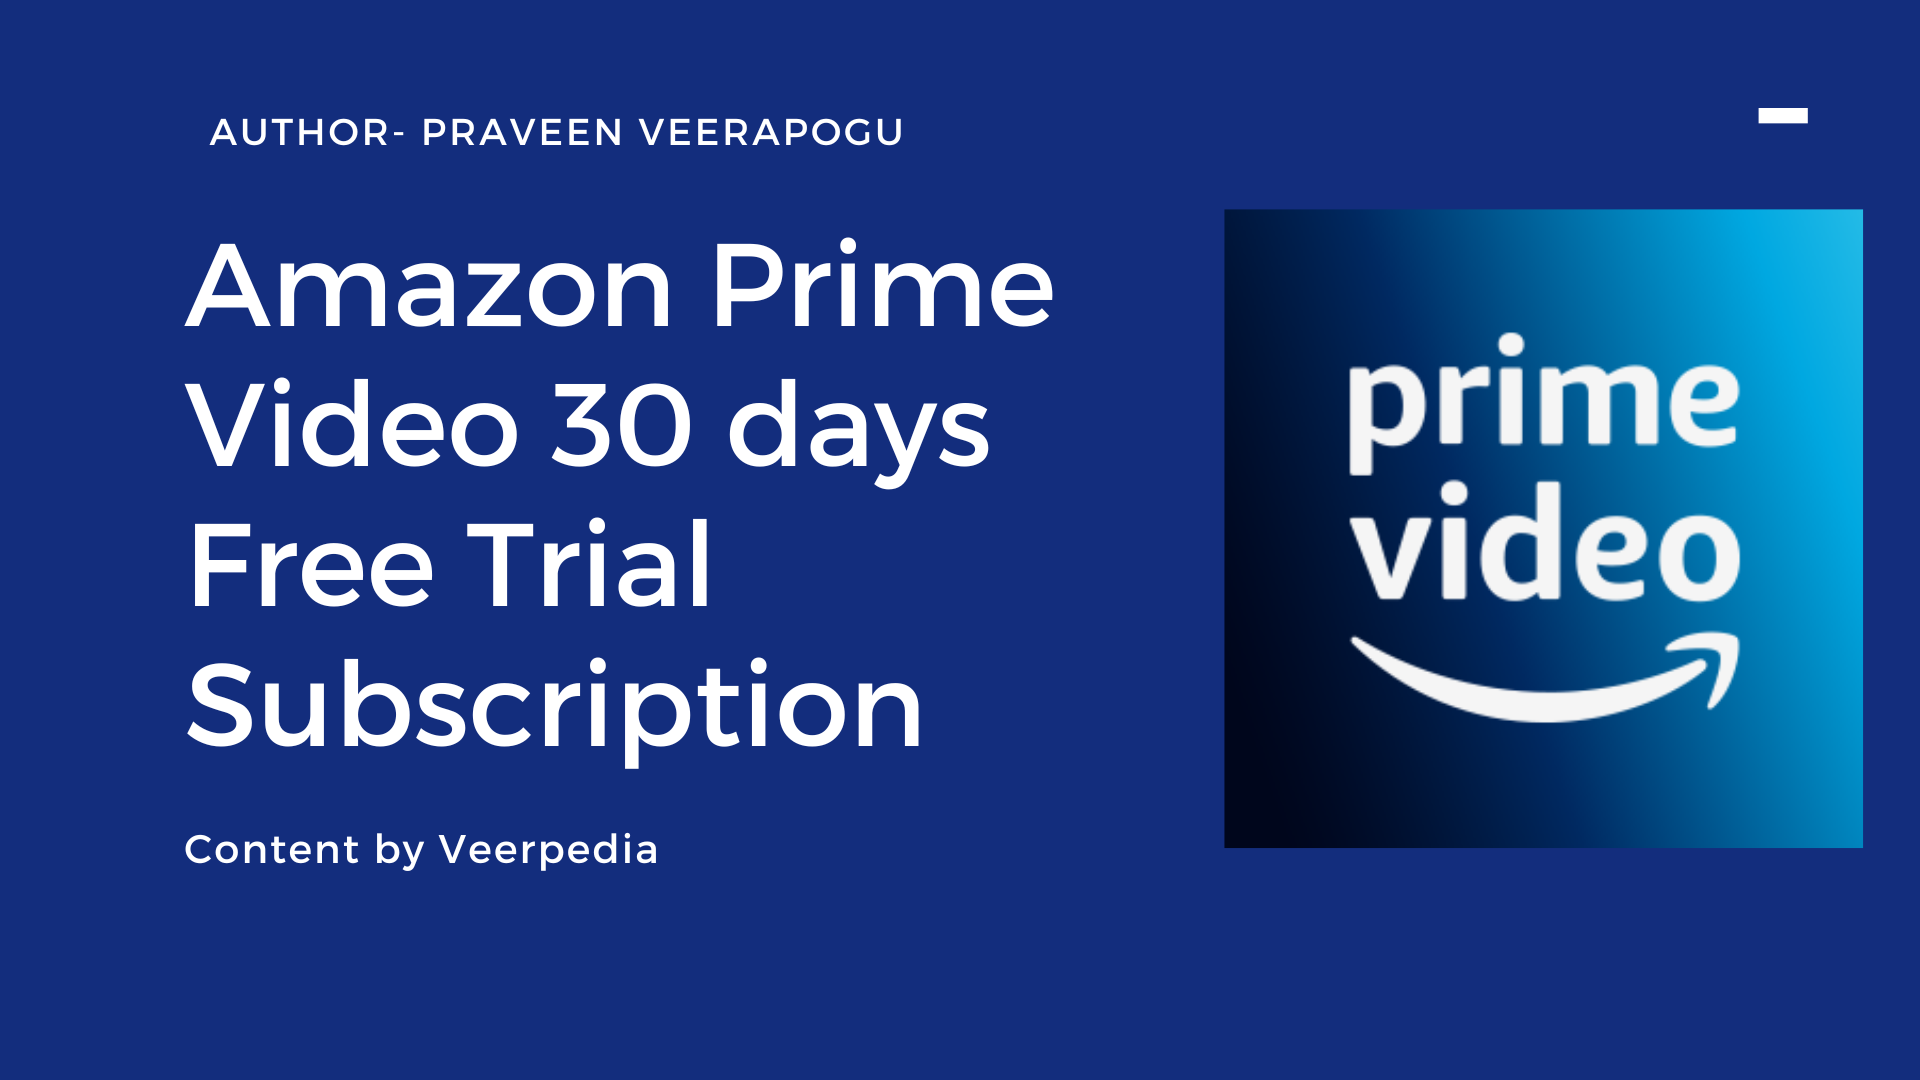 Process to get Amazon Prime Video 30 Days Free Tri... - Samsung Members